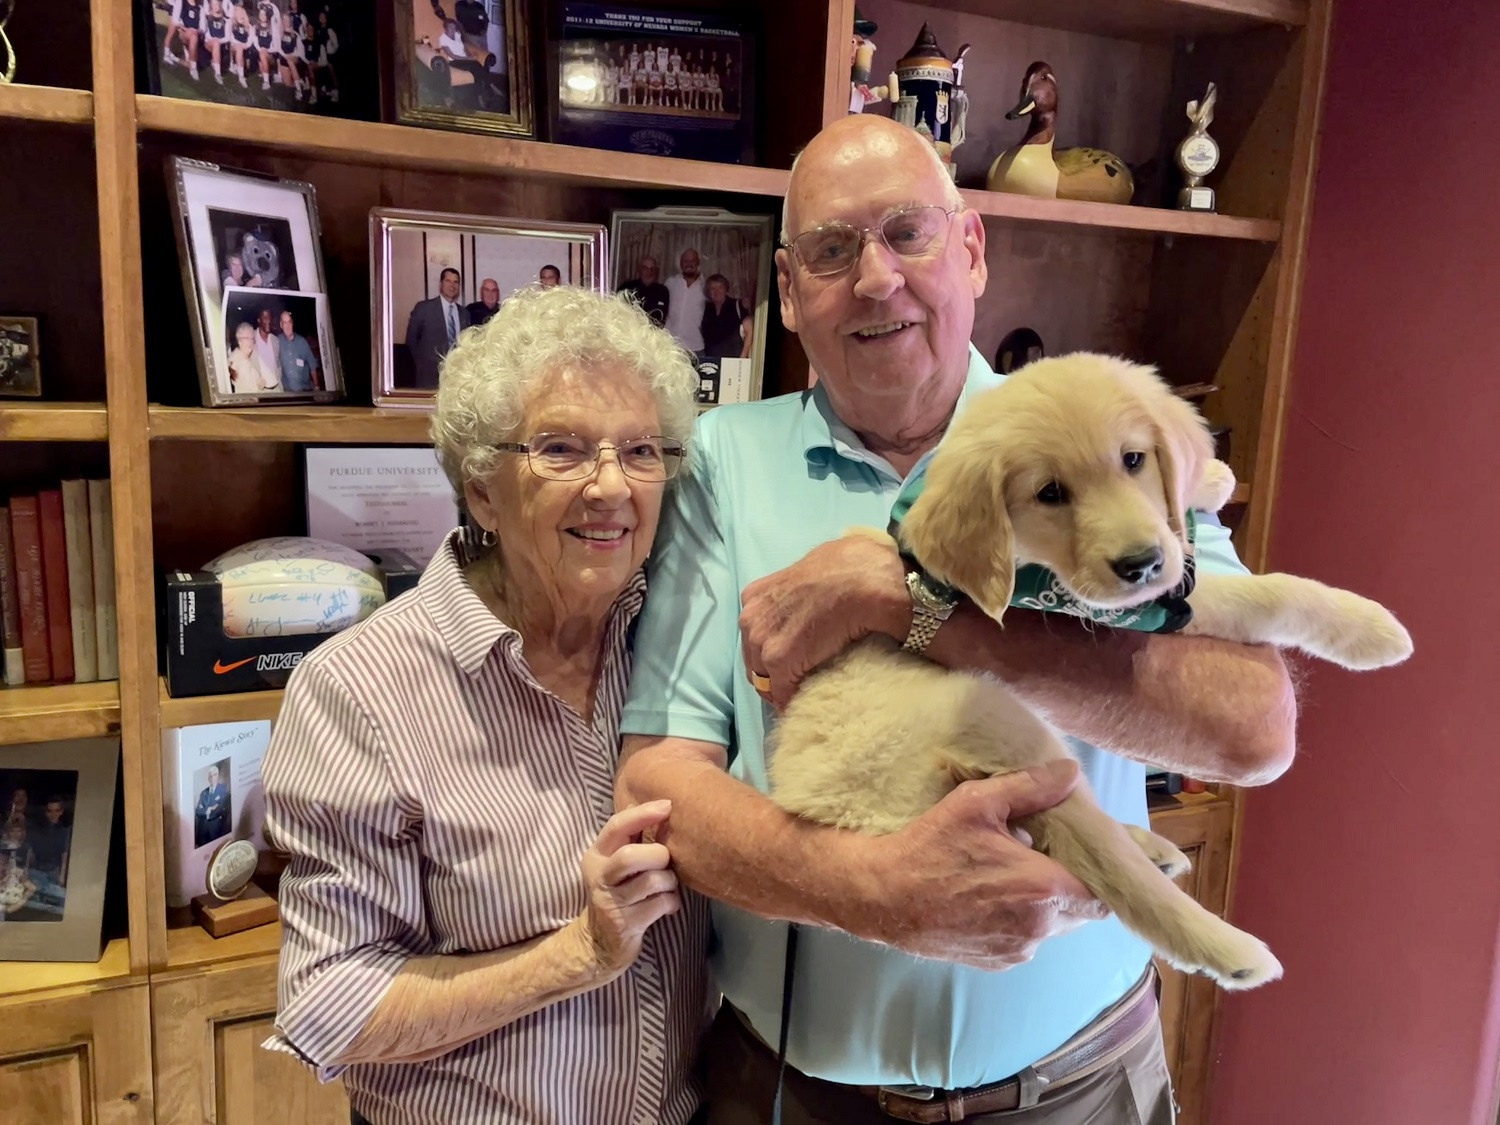 The Roxie and Jerry Enneking pose with a Golden Retriever guide dog puppy